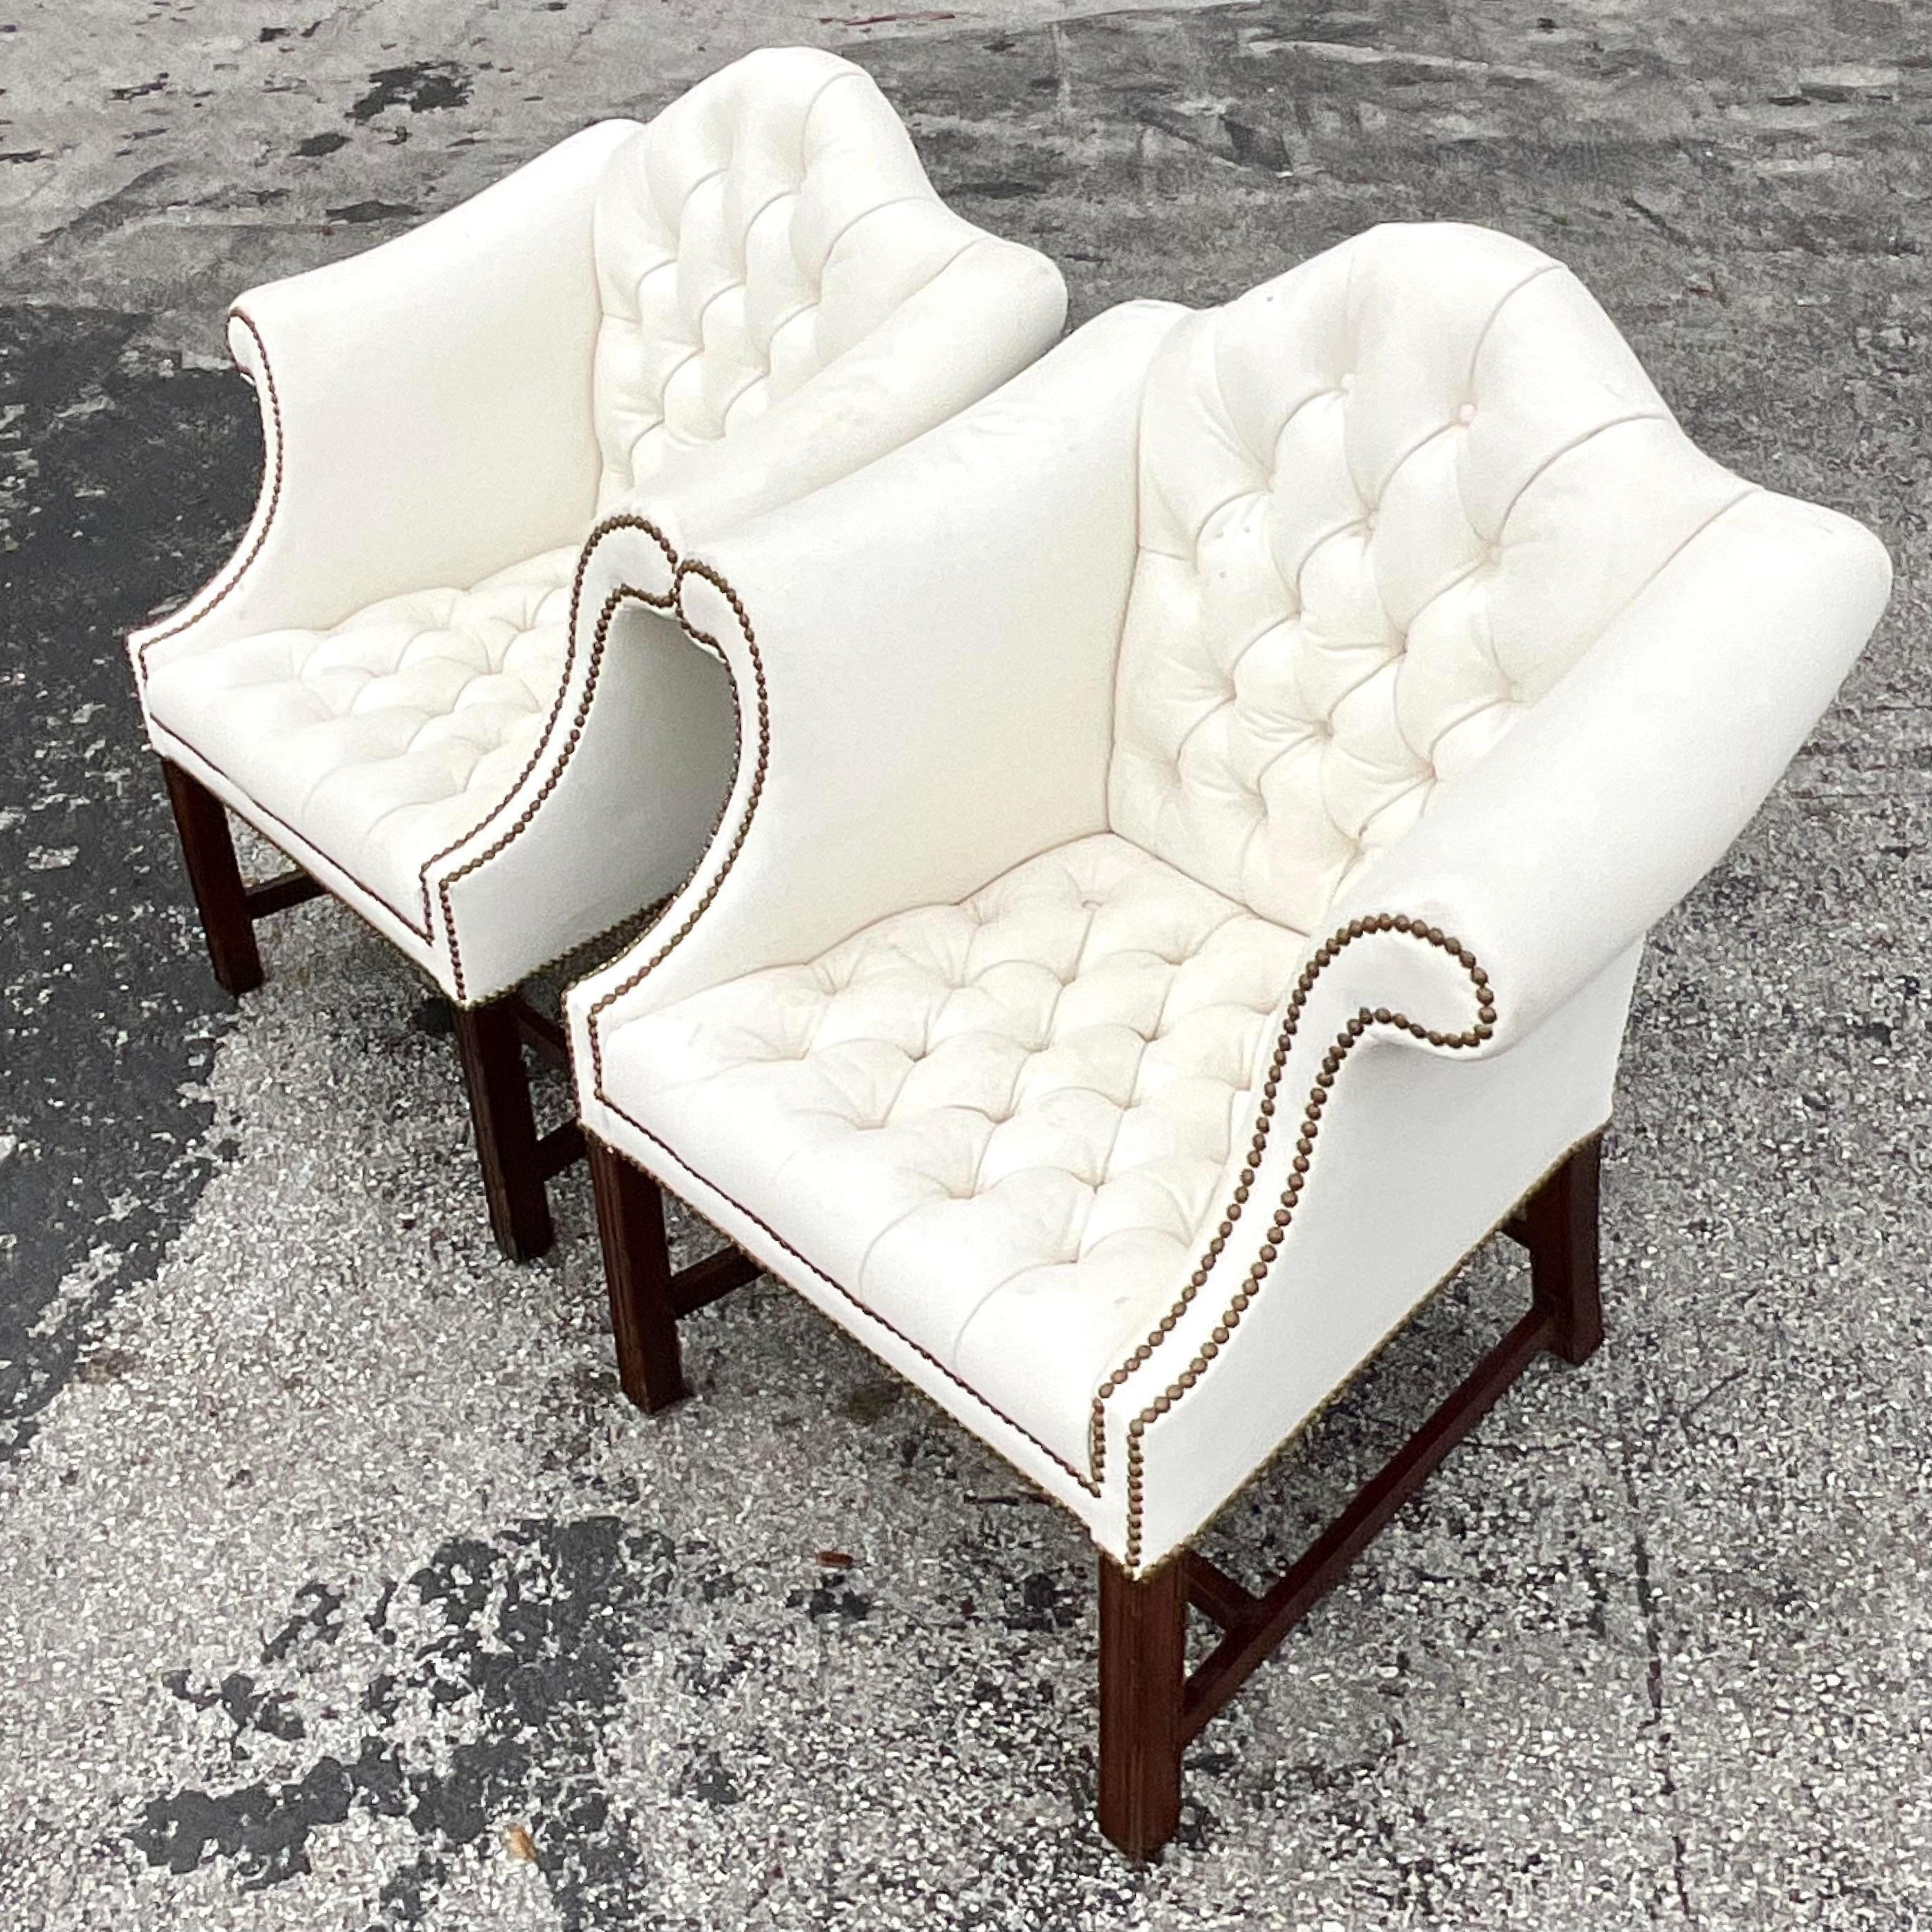 Vintage Traditional Camel Back Tufted Leather Arm Chairs - a Pair In Good Condition For Sale In west palm beach, FL